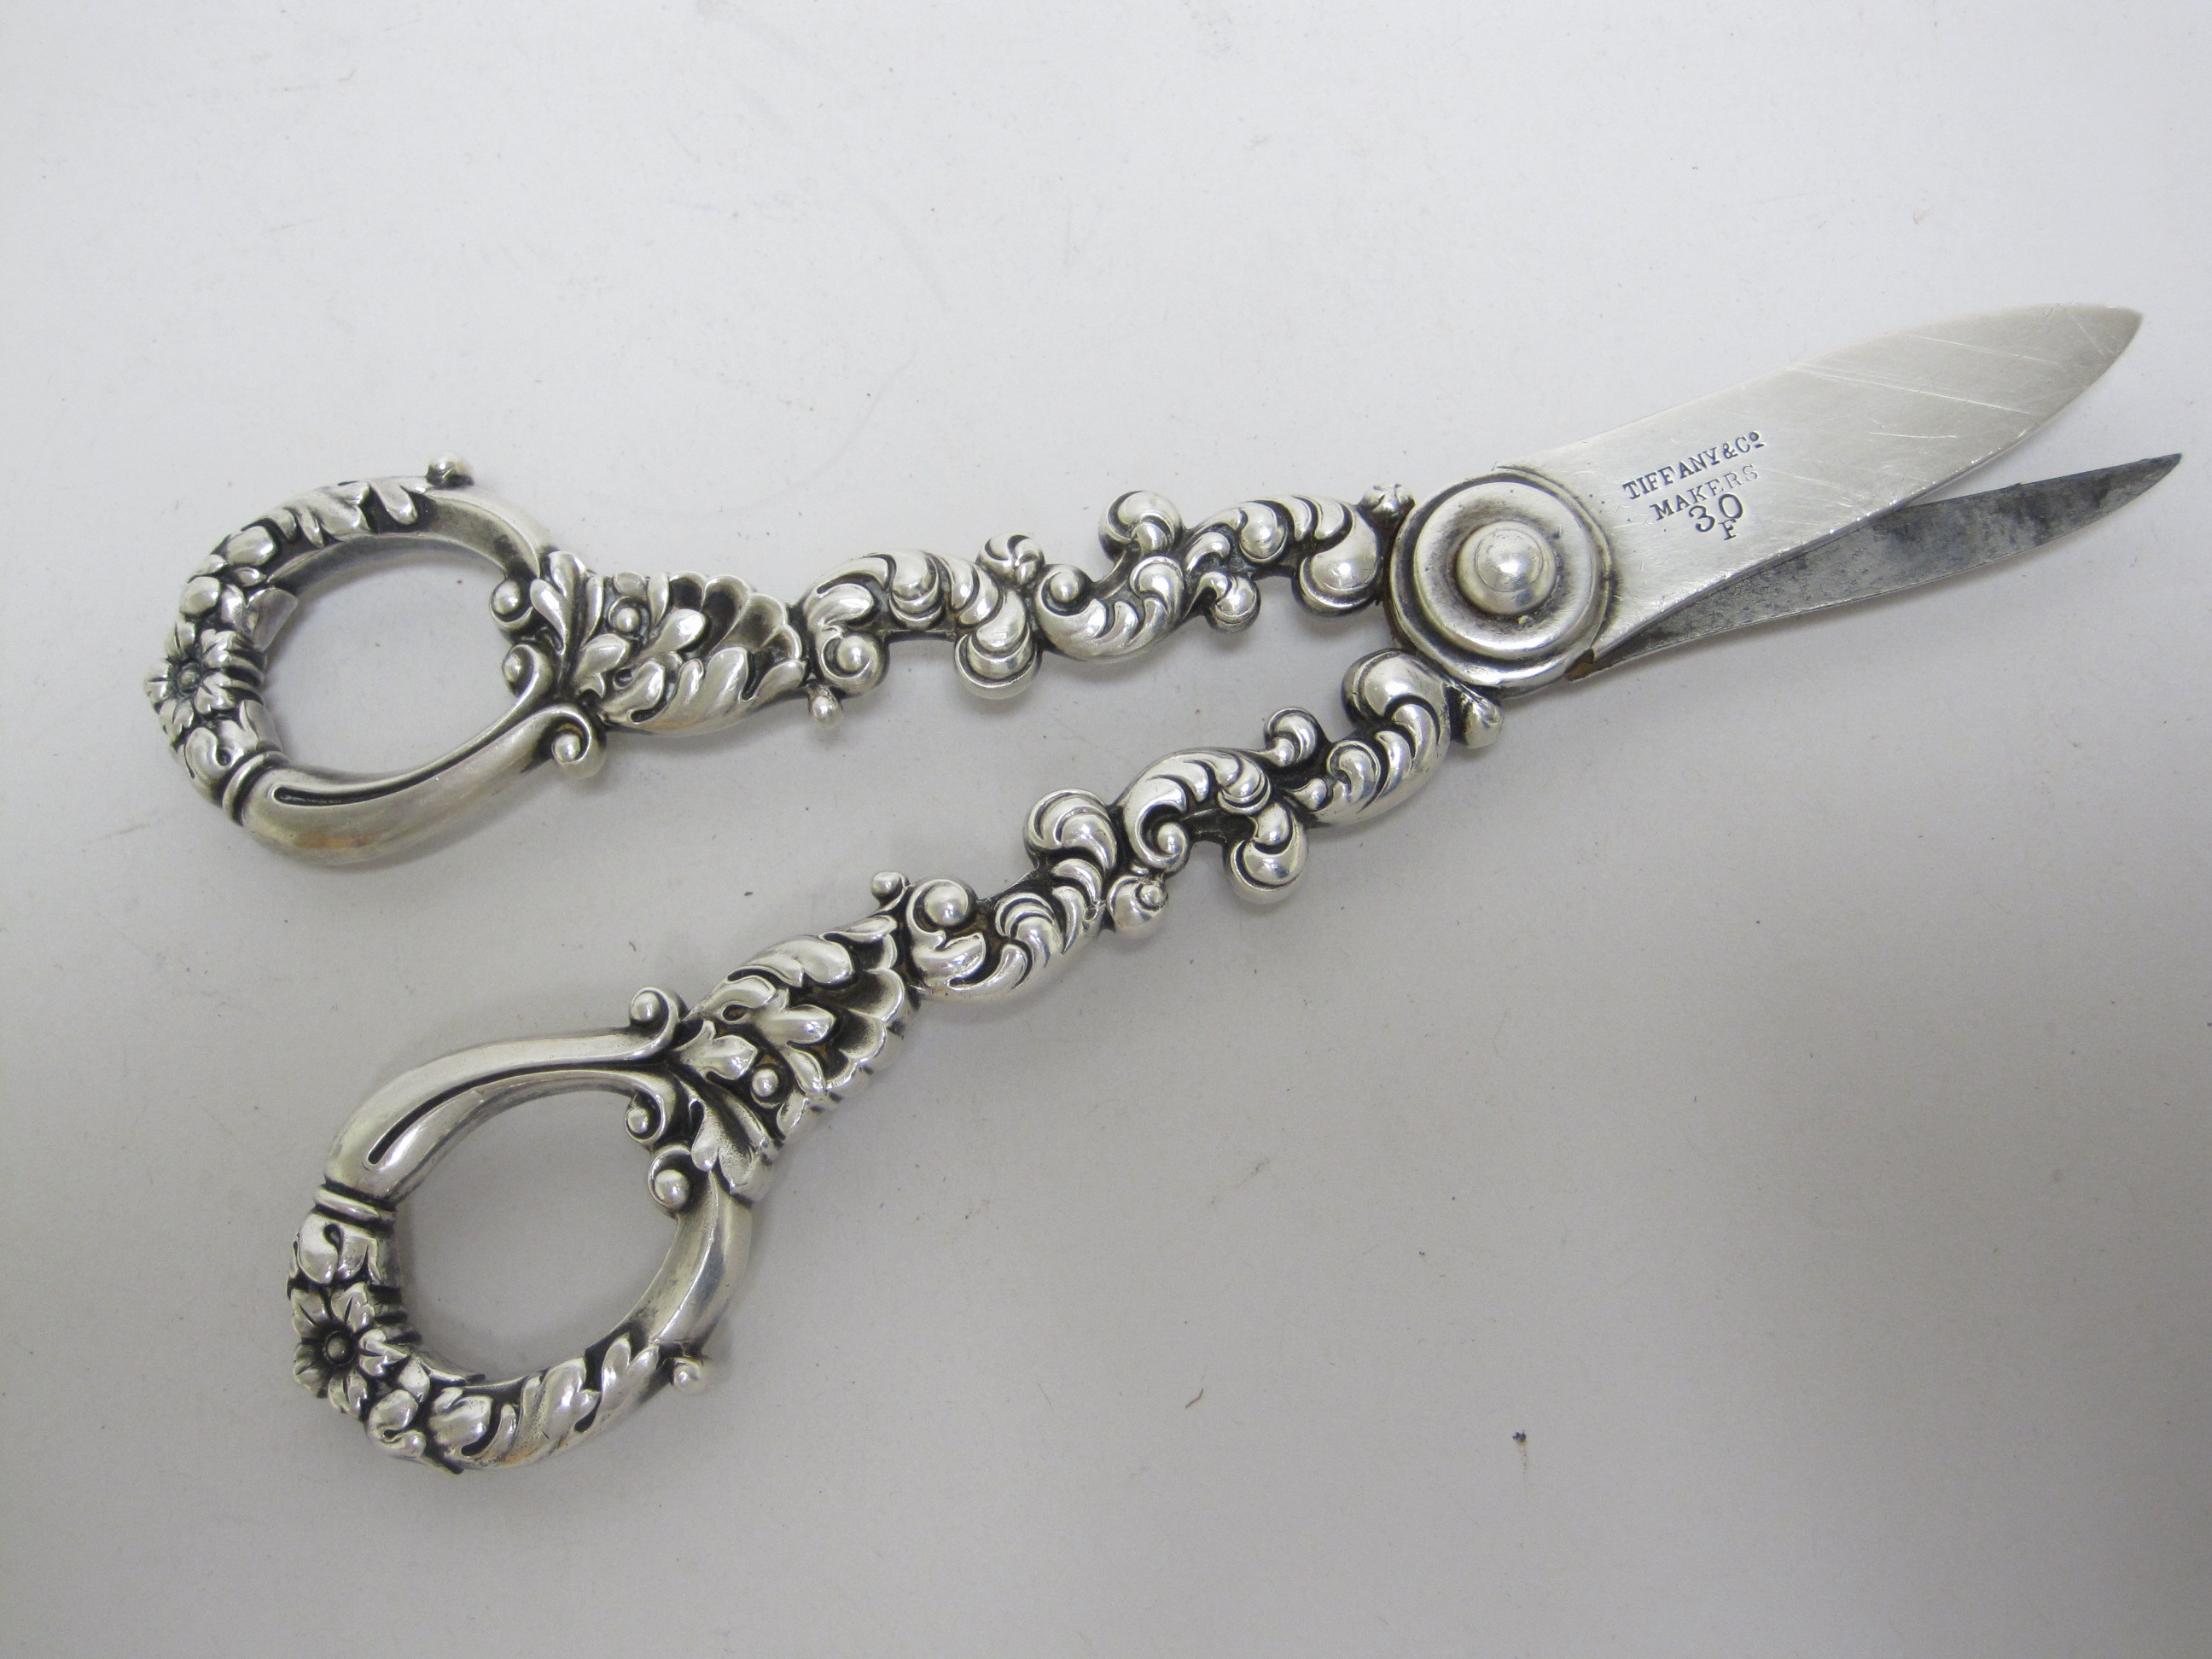 Pair of Tiffany & Co silver Grape Scissors with floral and leafage scroll design, marked: